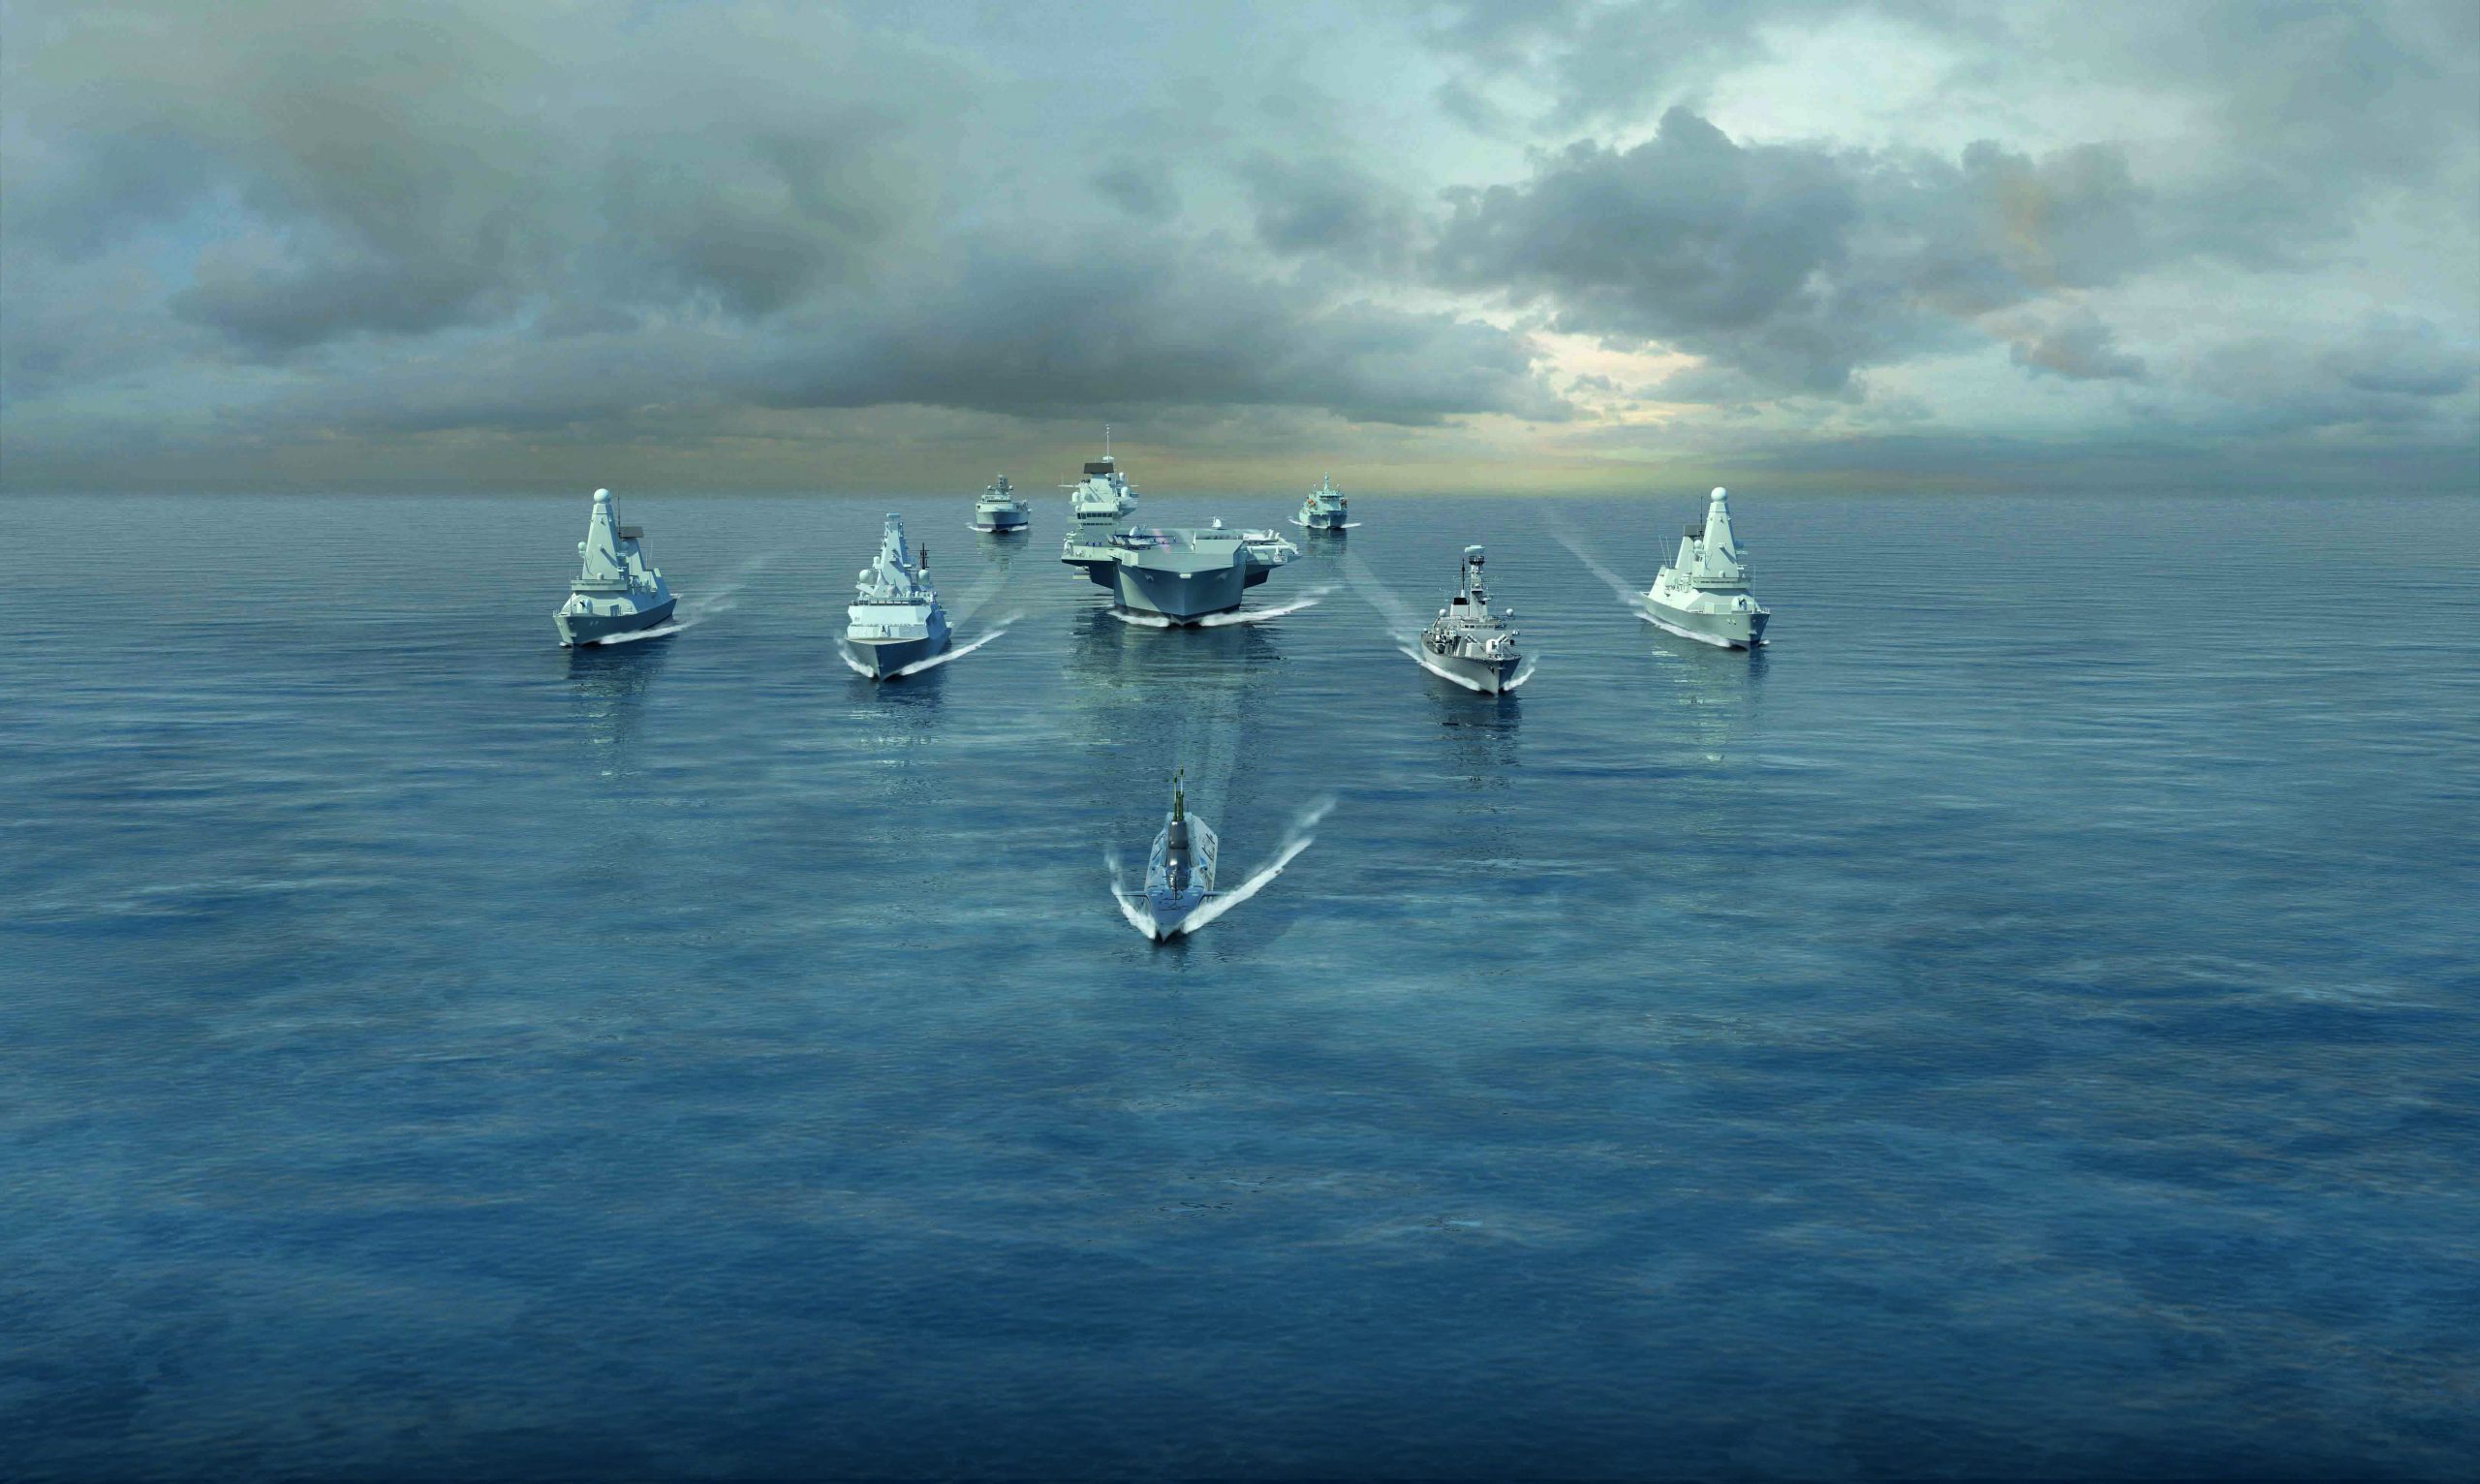 Carrier strike group at sea